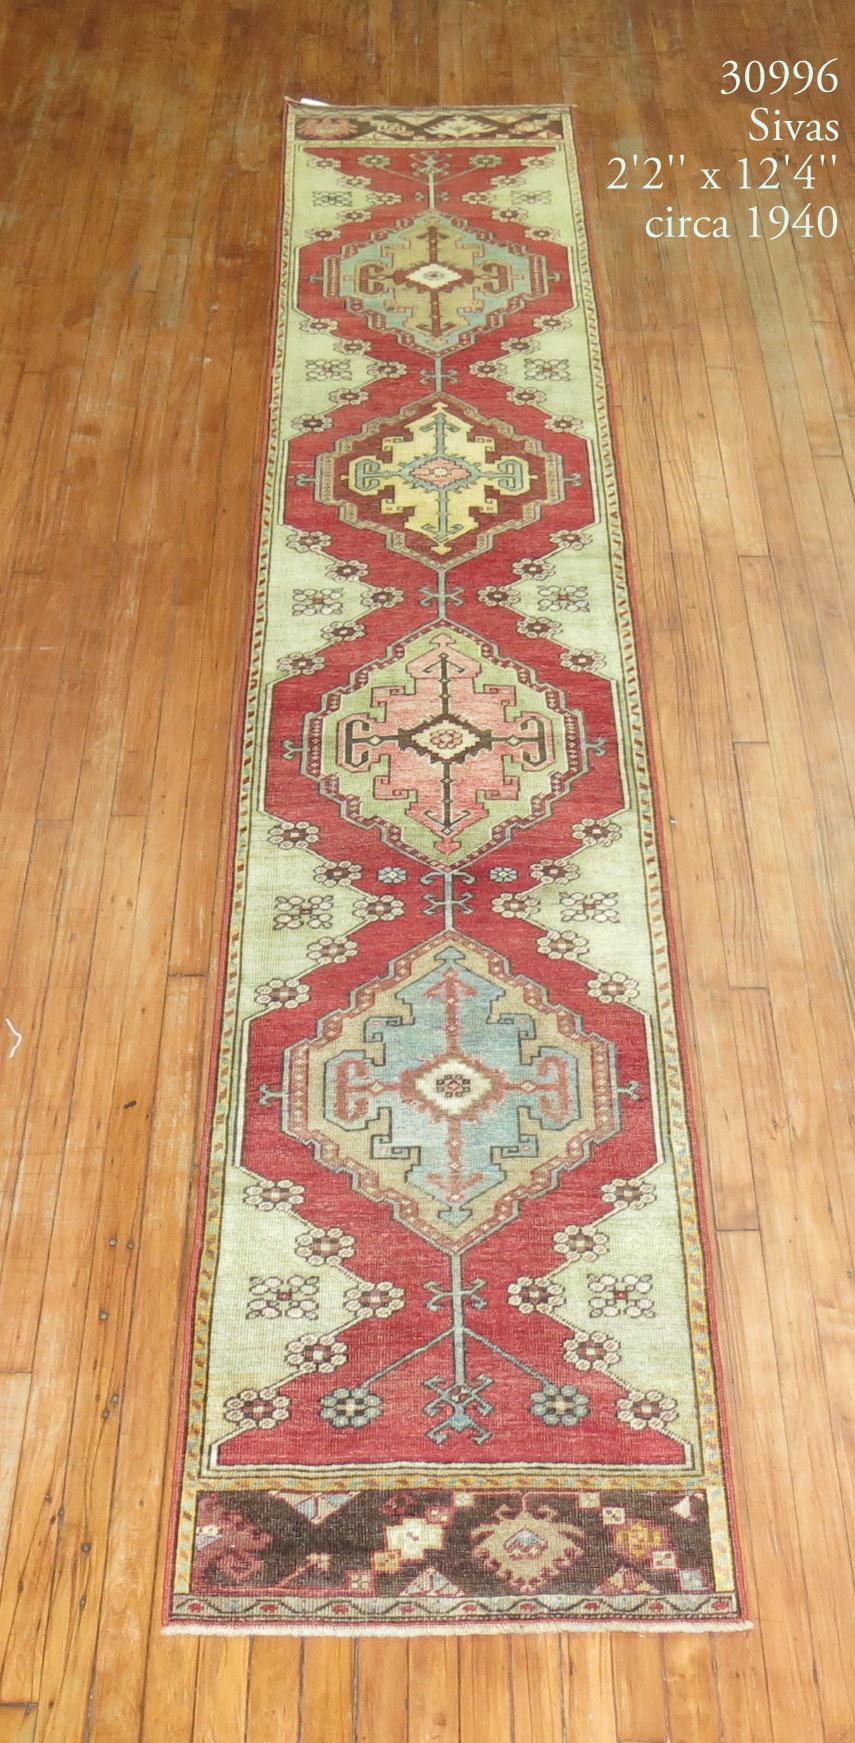 Narrow Turkish Sivas runner highlighted by sky blue and green accents on a red field, circa 1930

Measures: 2'2